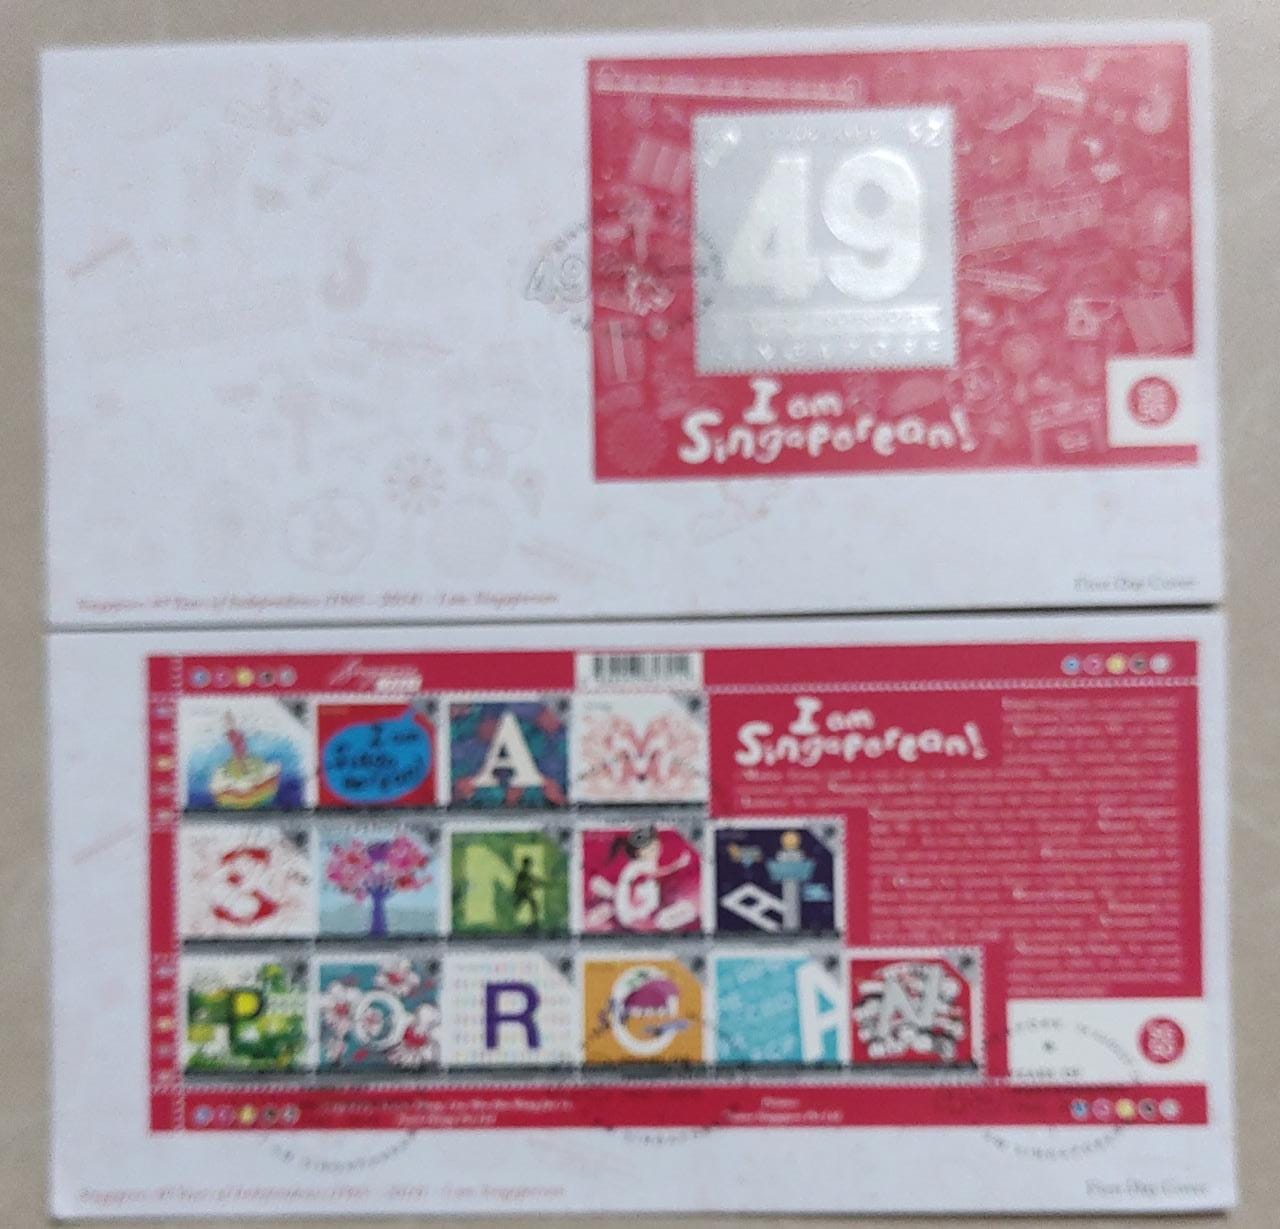 49 years of Singapore's independence. Set of 2 FDCs.